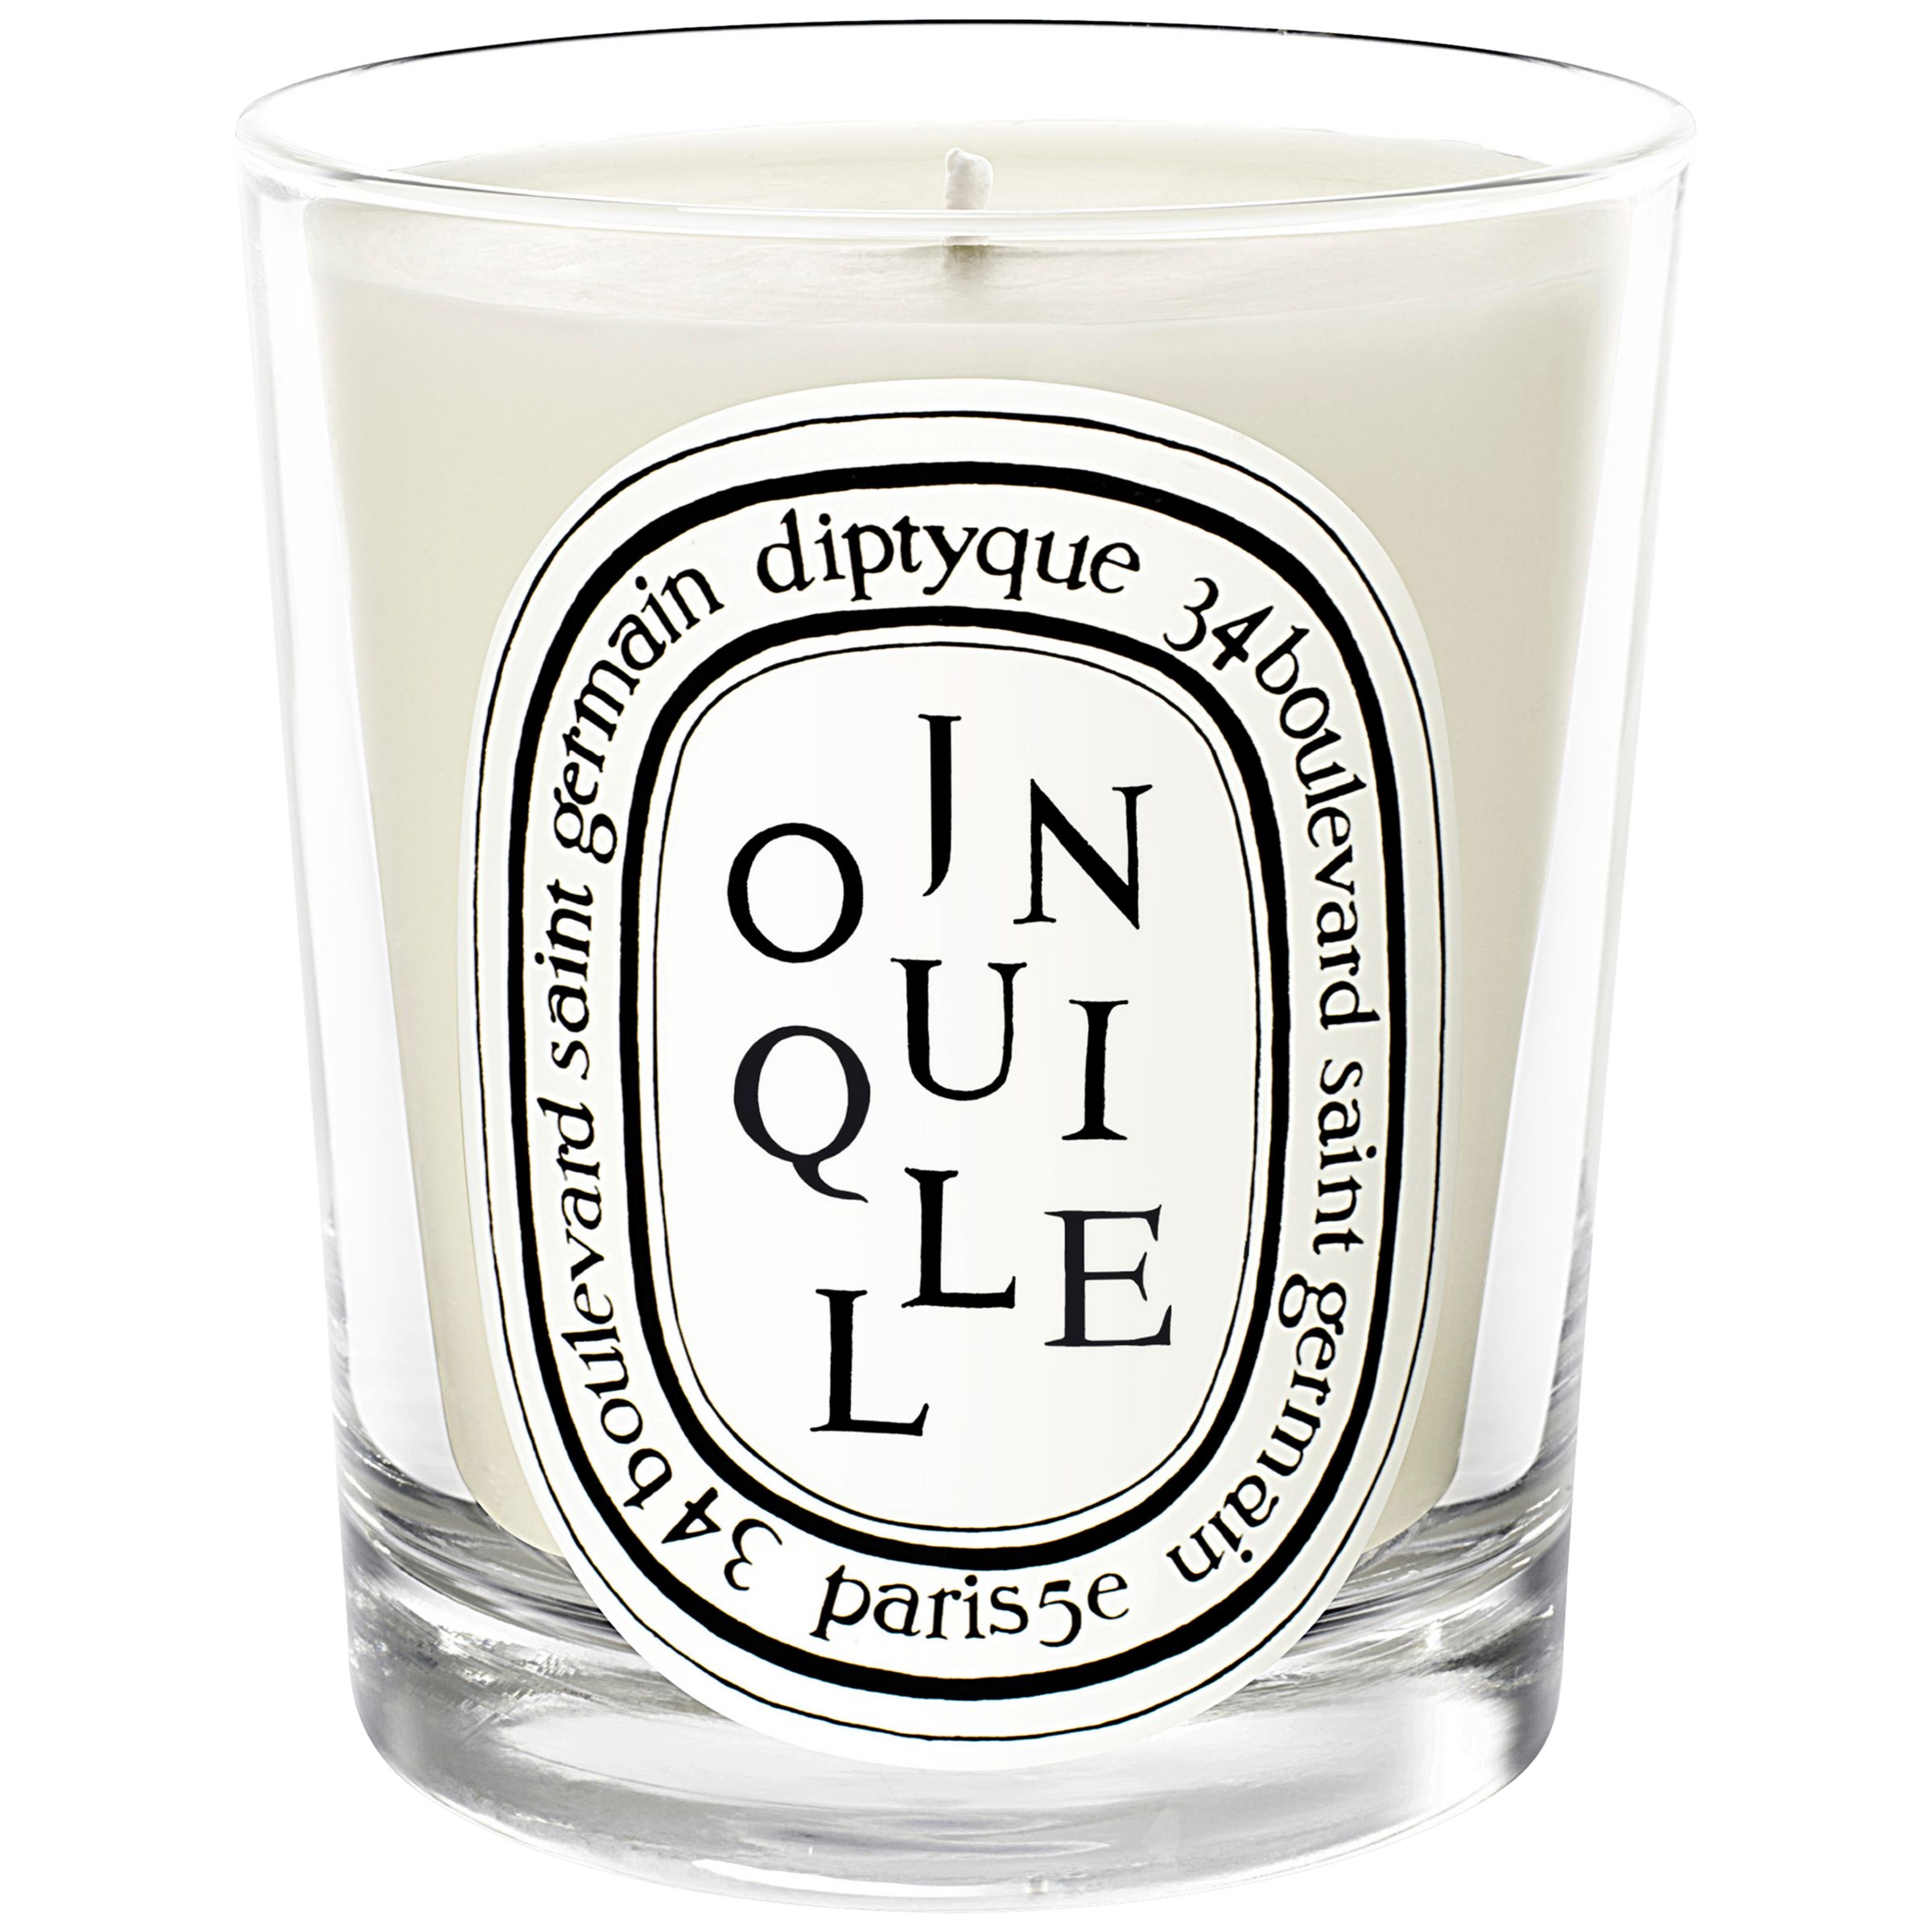 Jonquille Candle, 190g 465072